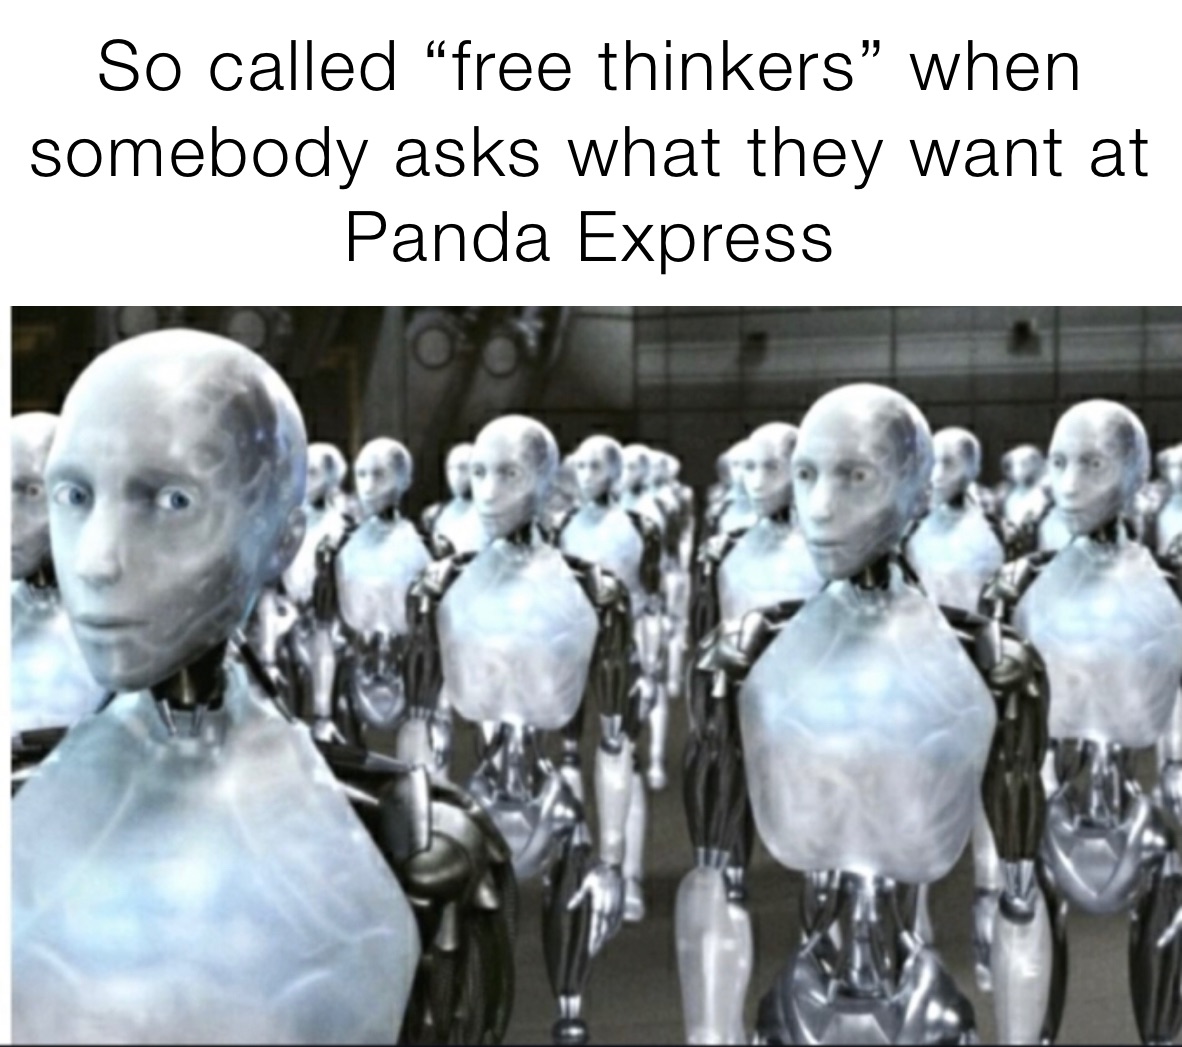 So called “free thinkers” when somebody asks what they want at Panda Express 